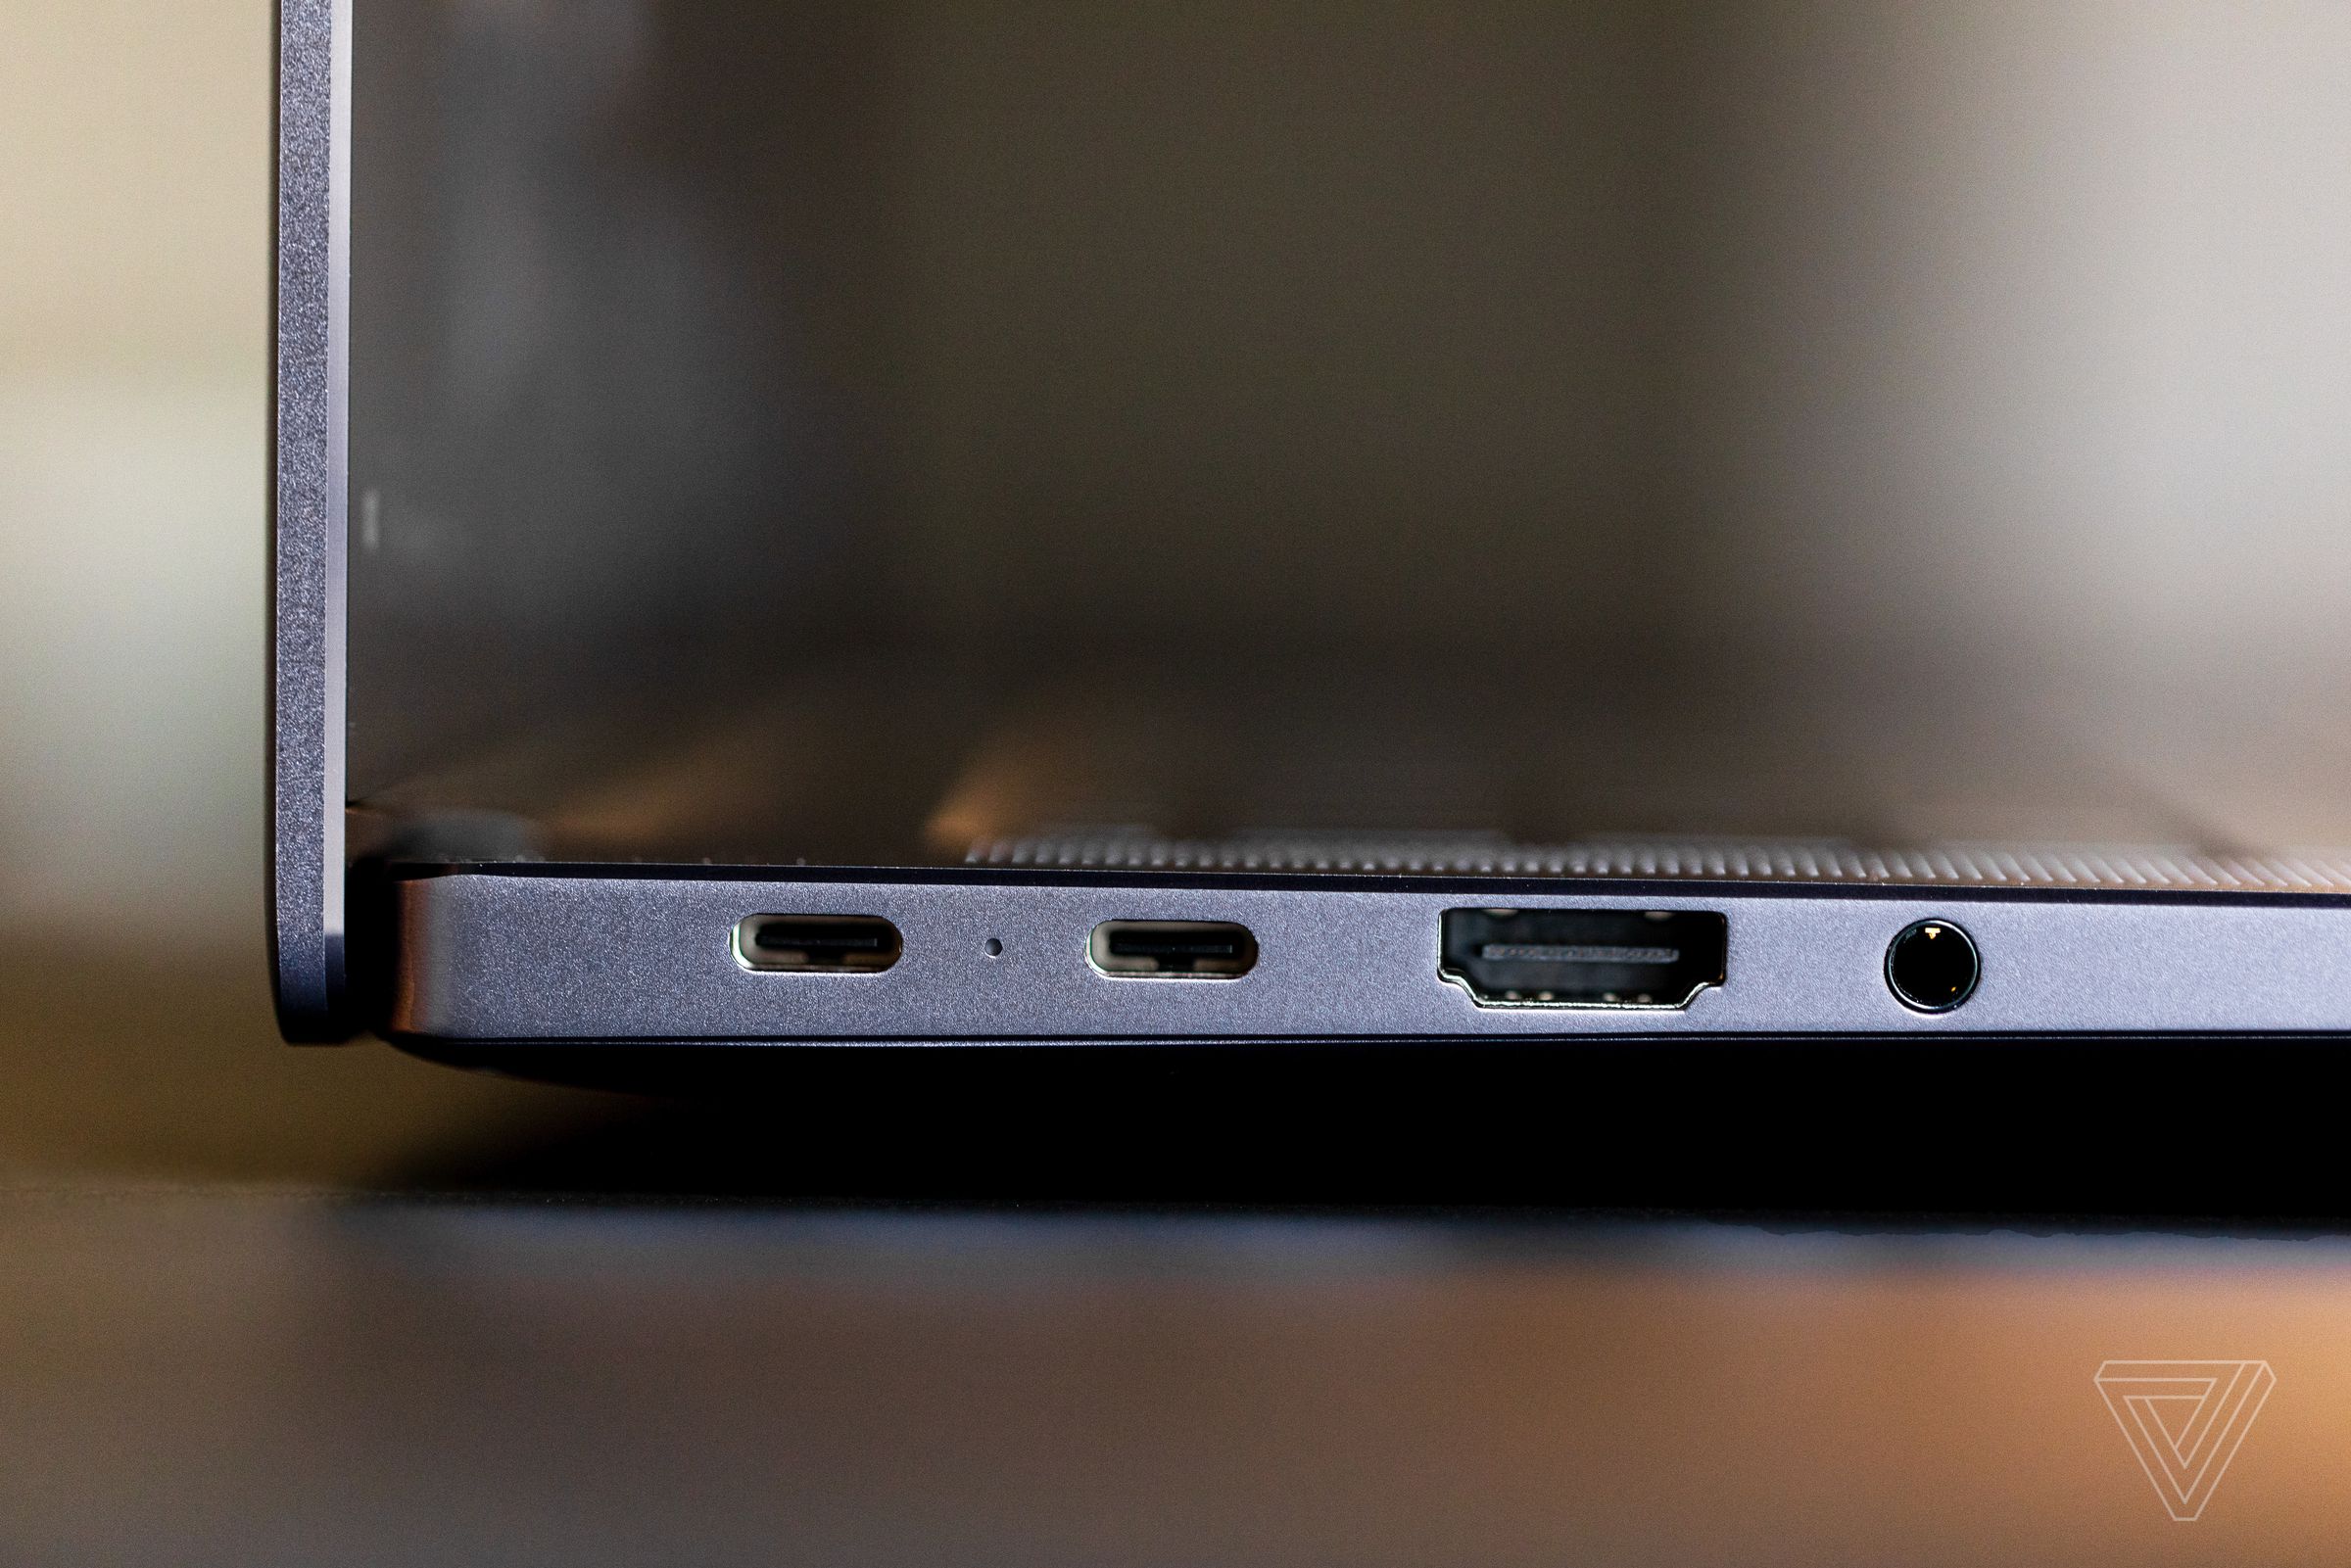 The ports on the left side of the Huawei MateBook 16.